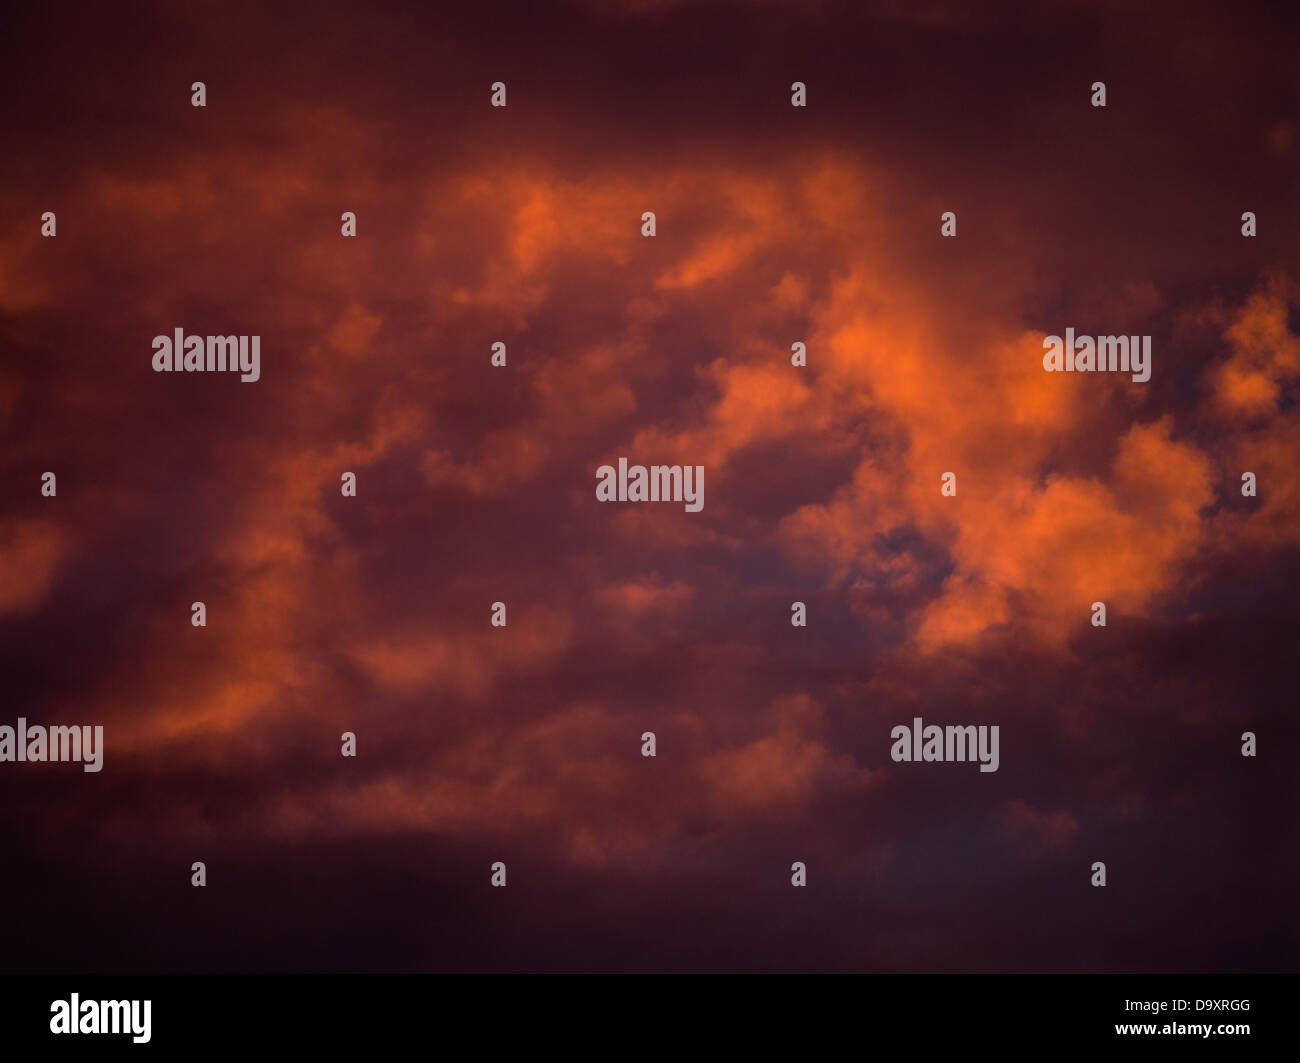 dh Evening cloud SKY WEATHER Red orange dark storm clouds black skies above sunset stormy background atmospheric atmosphere Stock Photo